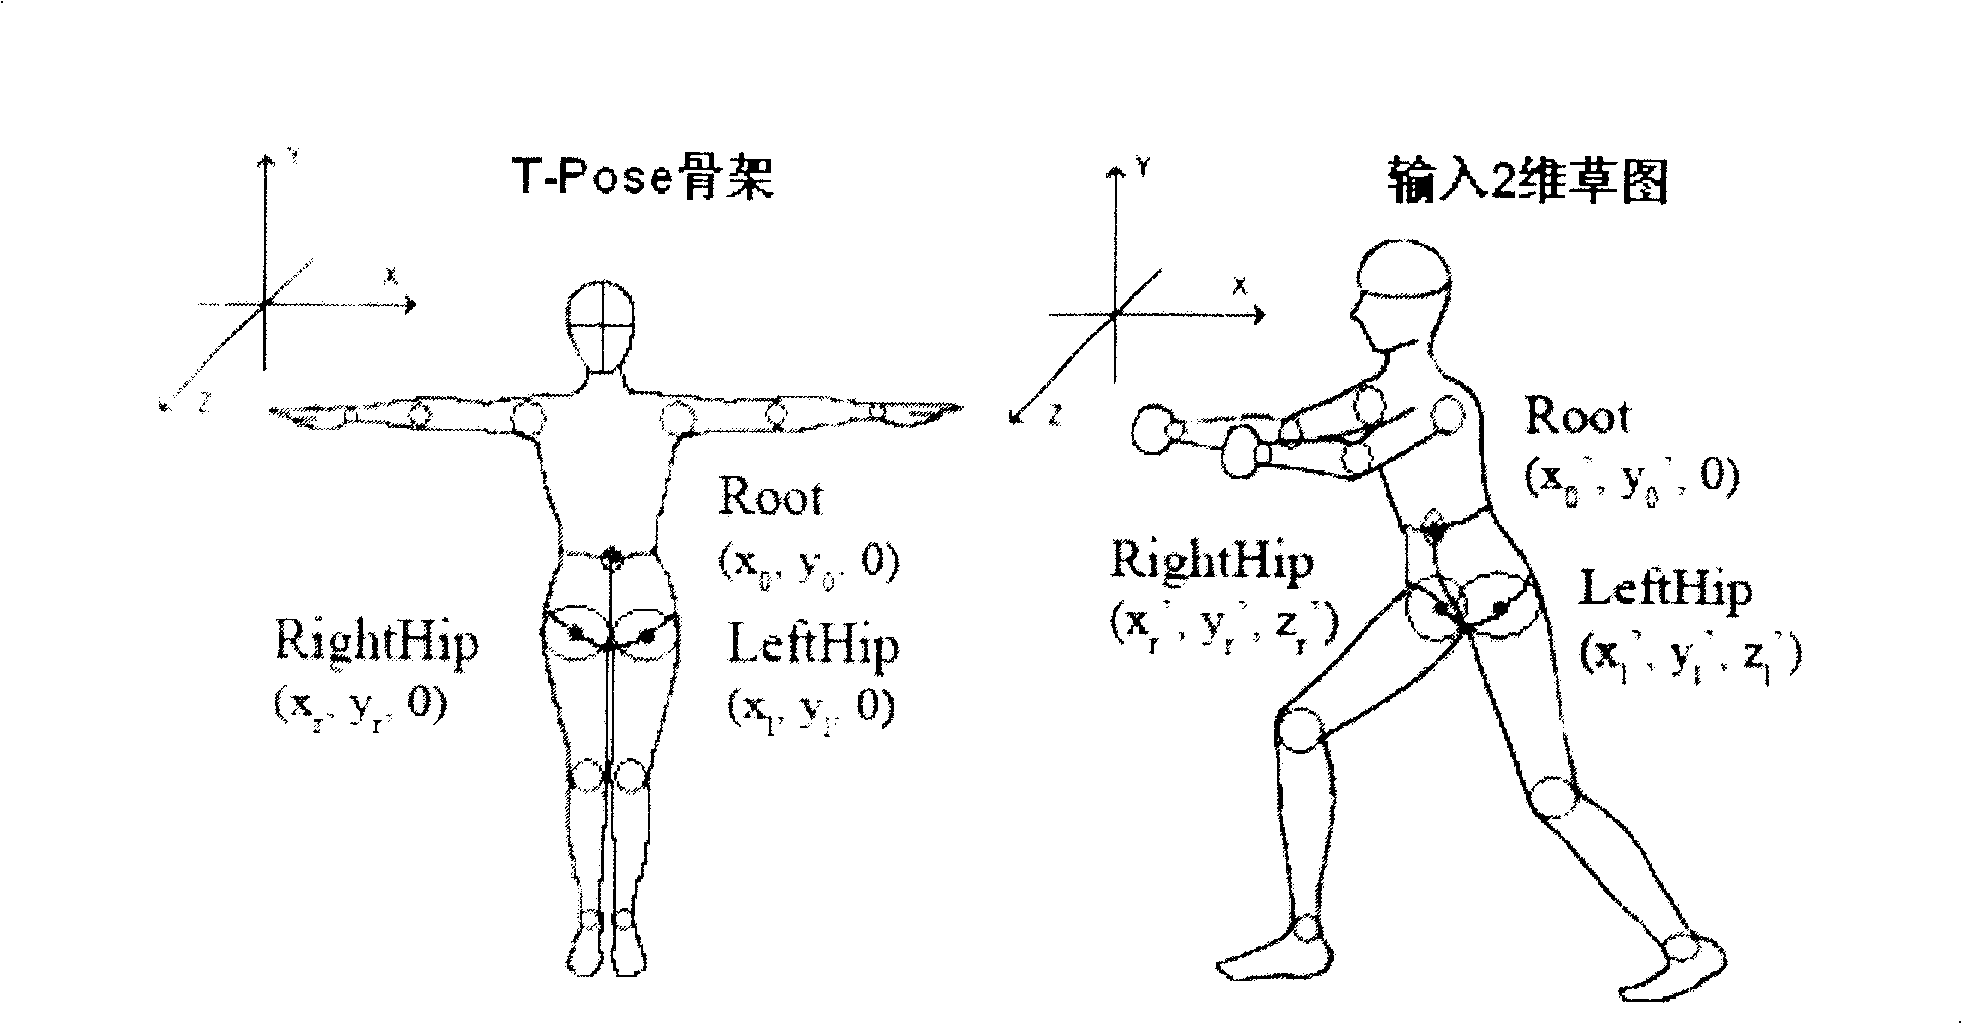 Forming and editing method for three dimension martial art actions based on draft driven by data